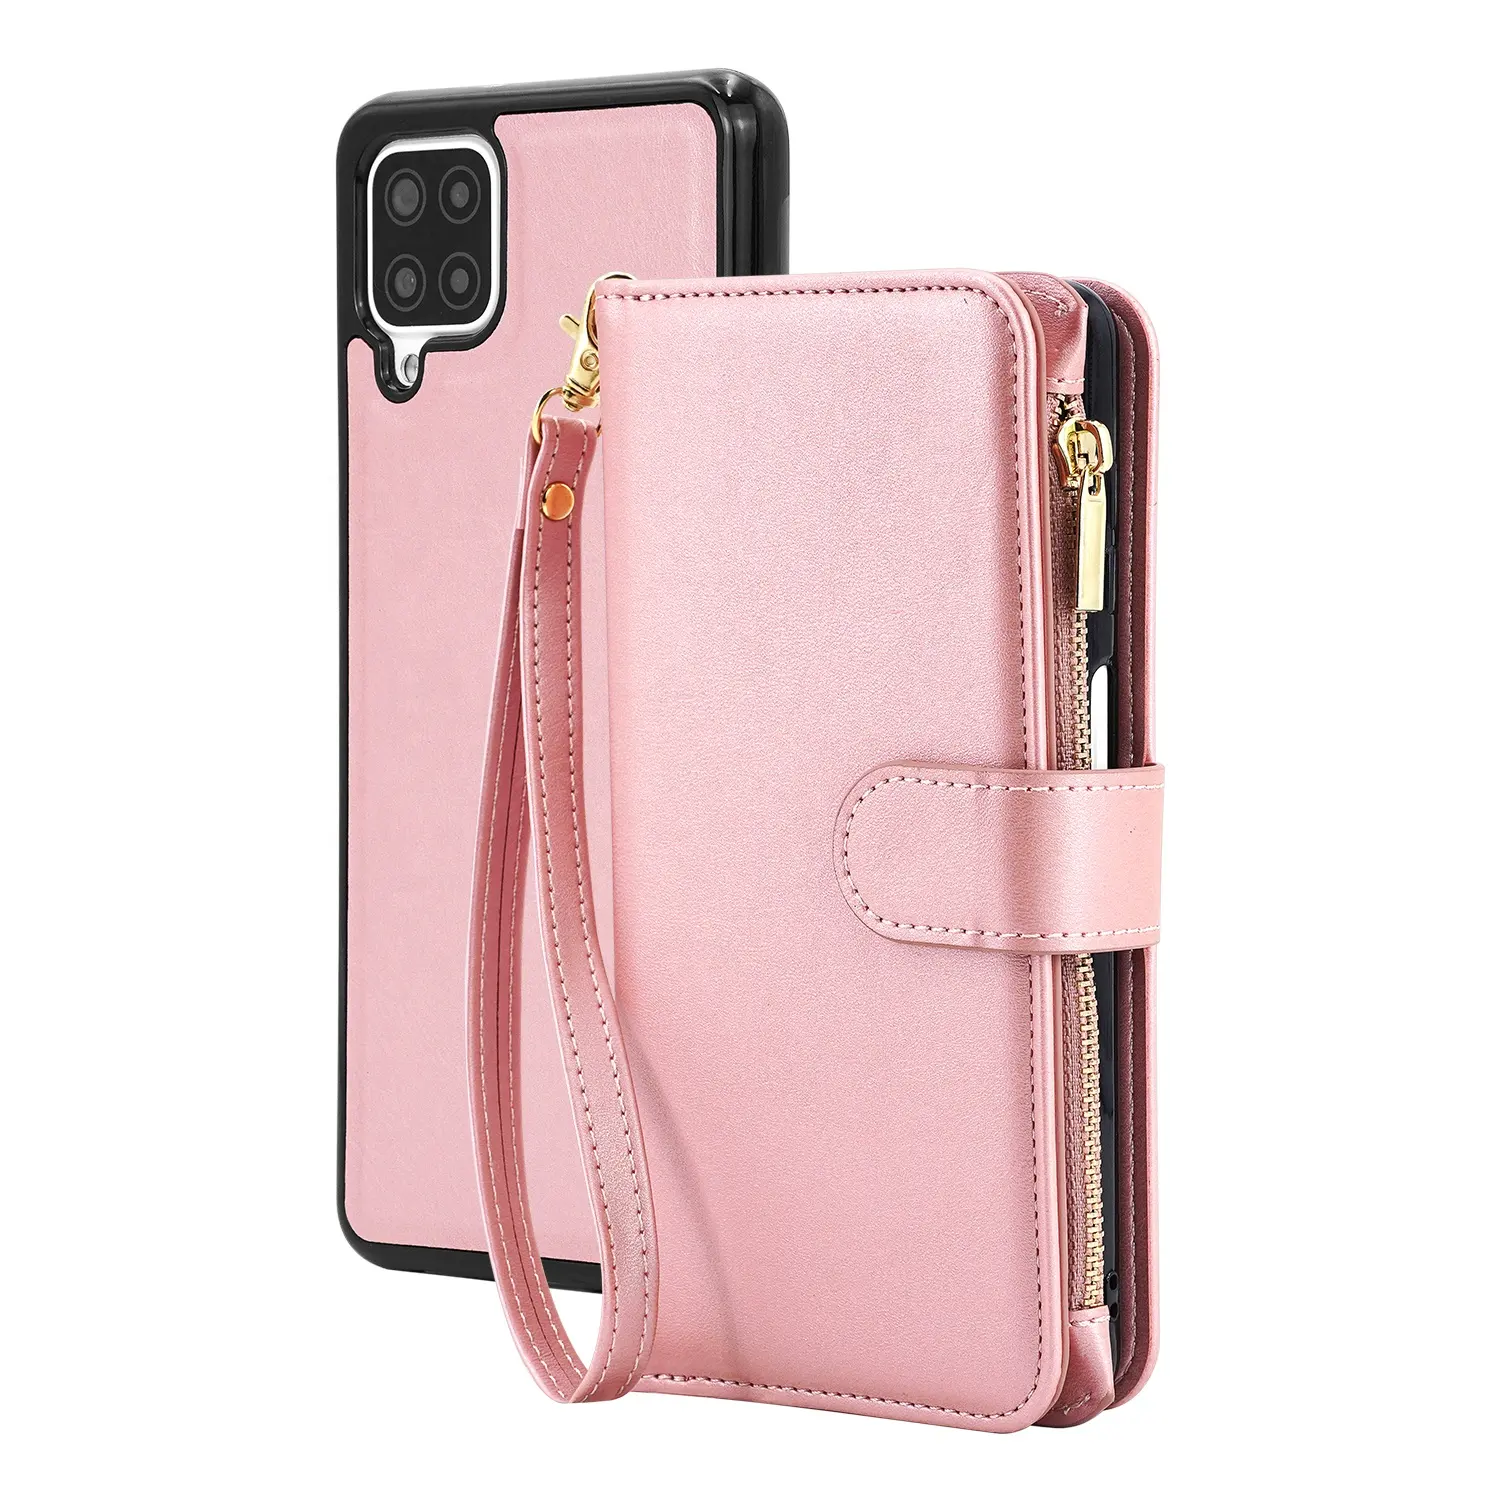 Luxury Zip Wallet PU leather phone case Flip Book style Magnetic Detachable TPU case For IPHONE SAMSUNG HUAWEI LG MOTO XIAOMI